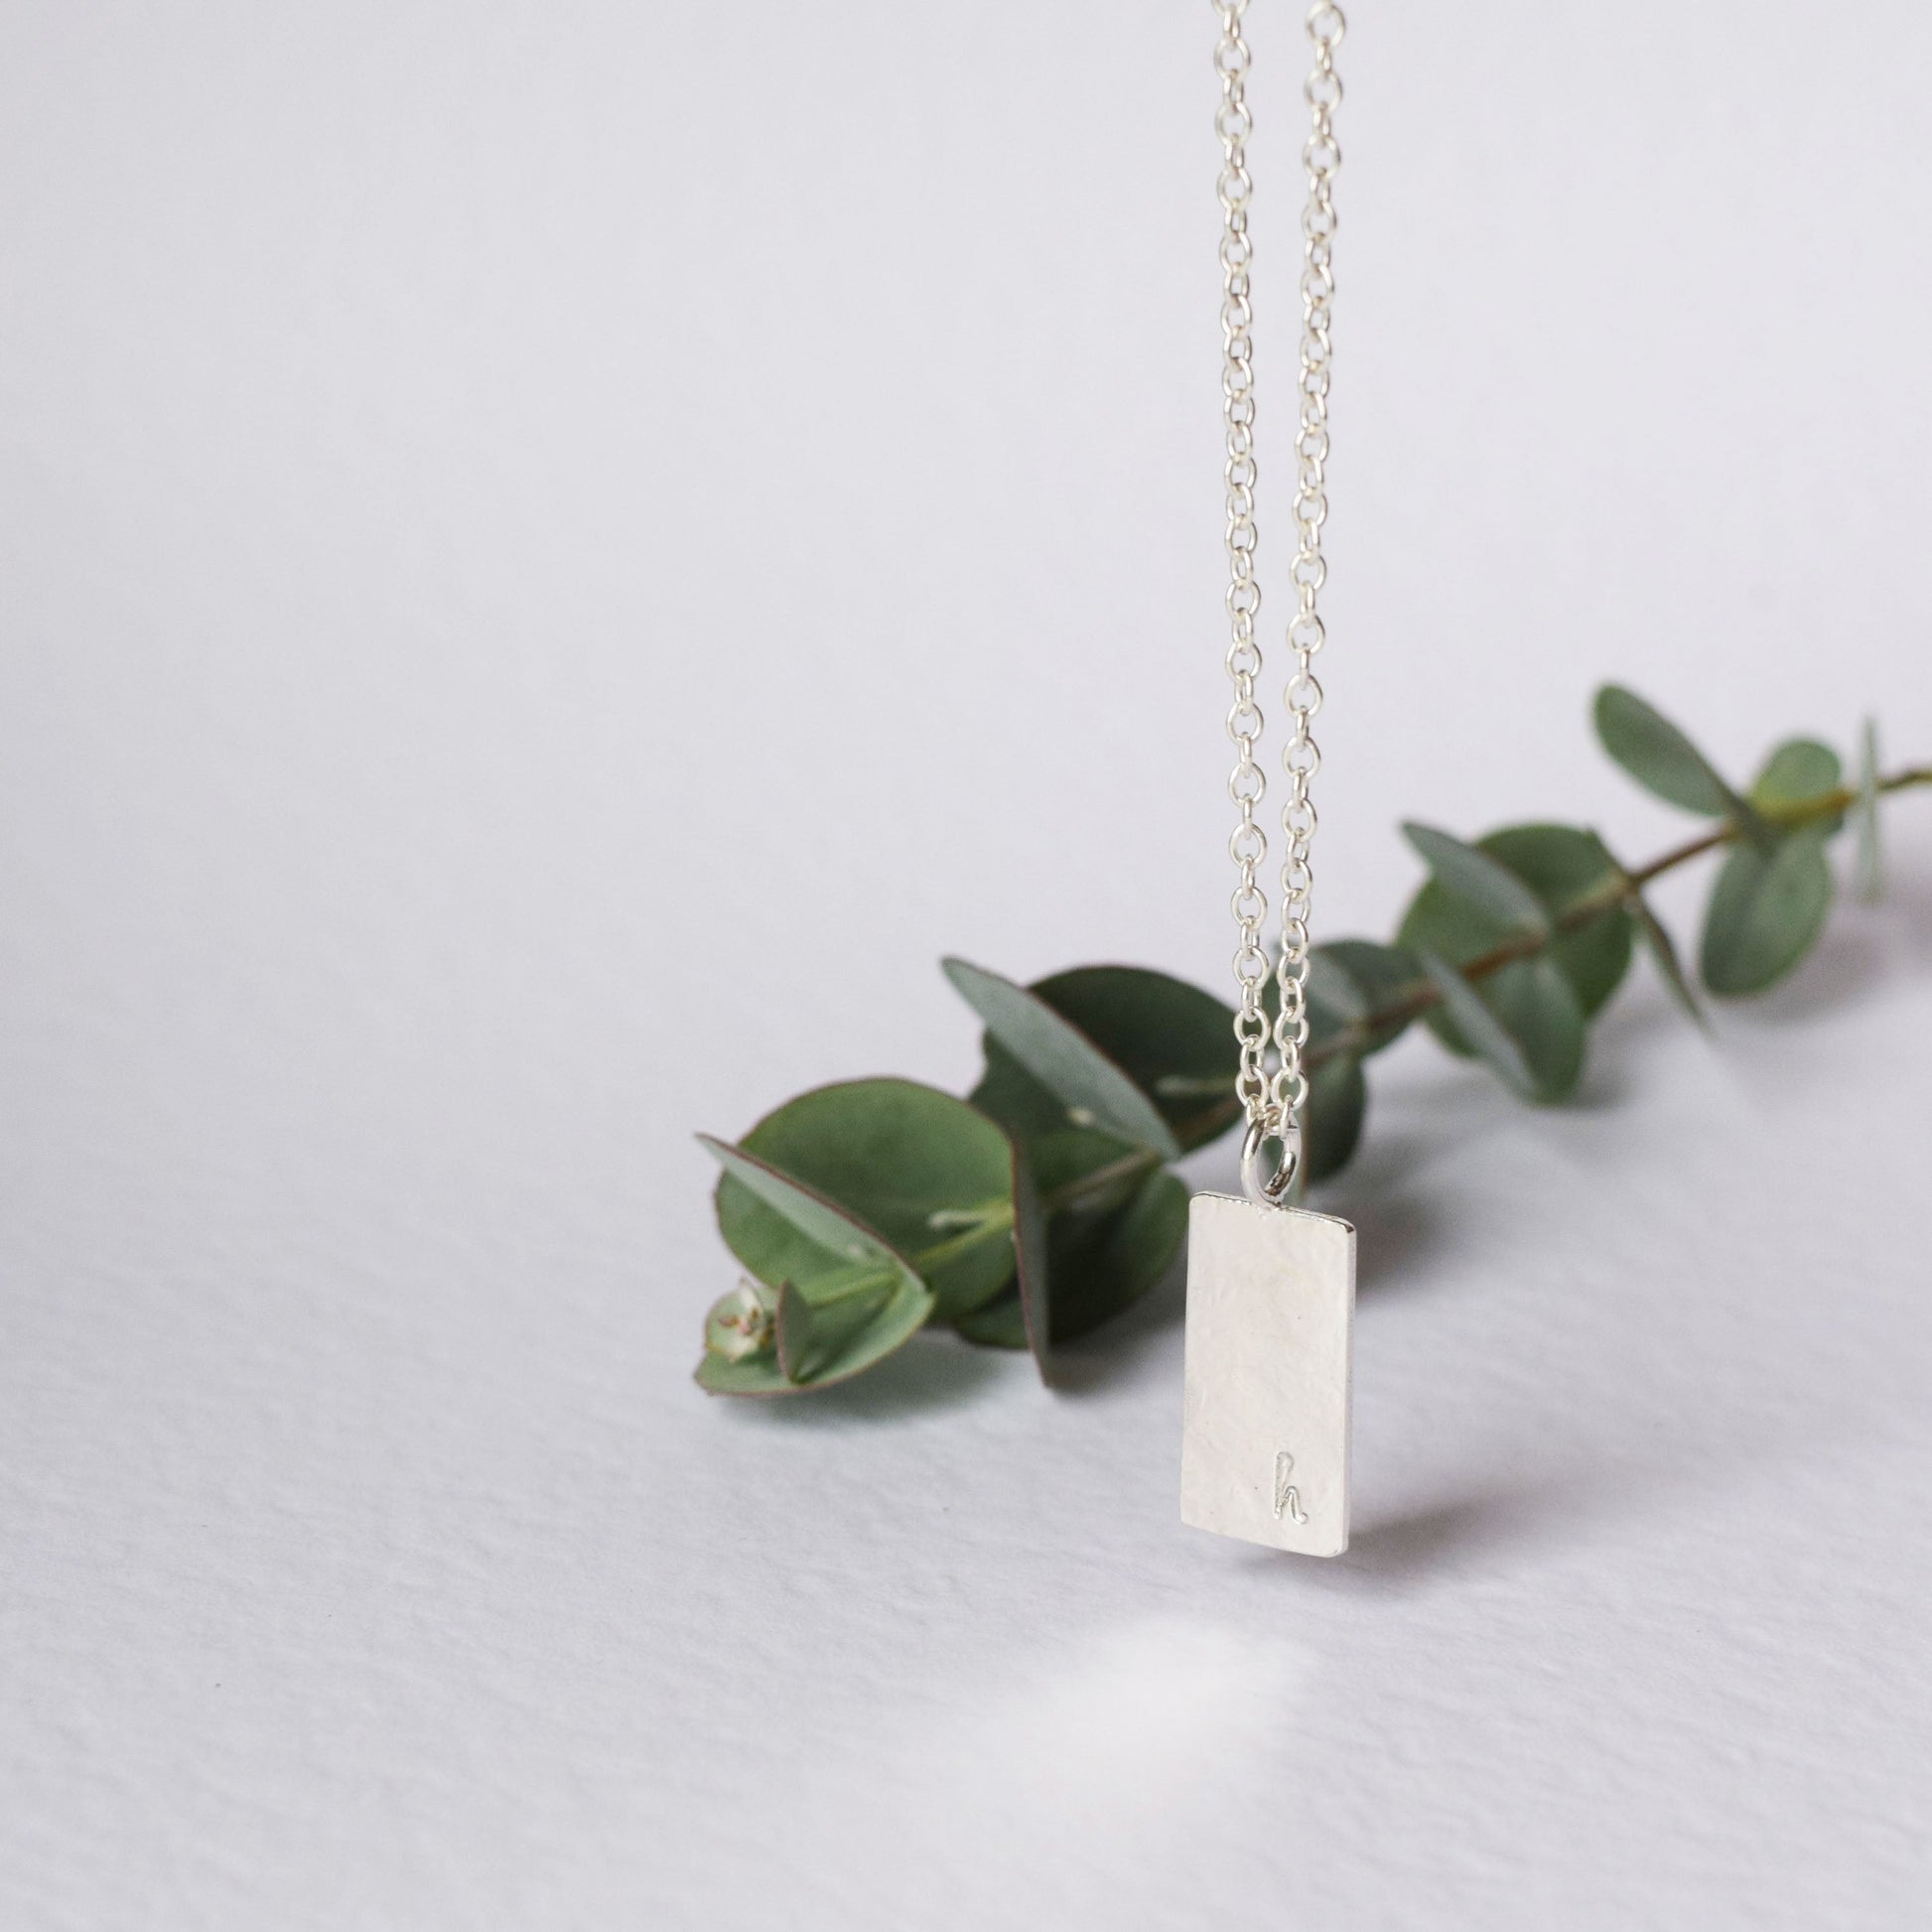 Personalised with the initial H this square pendant necklace is hanging with eucalyptus in the background